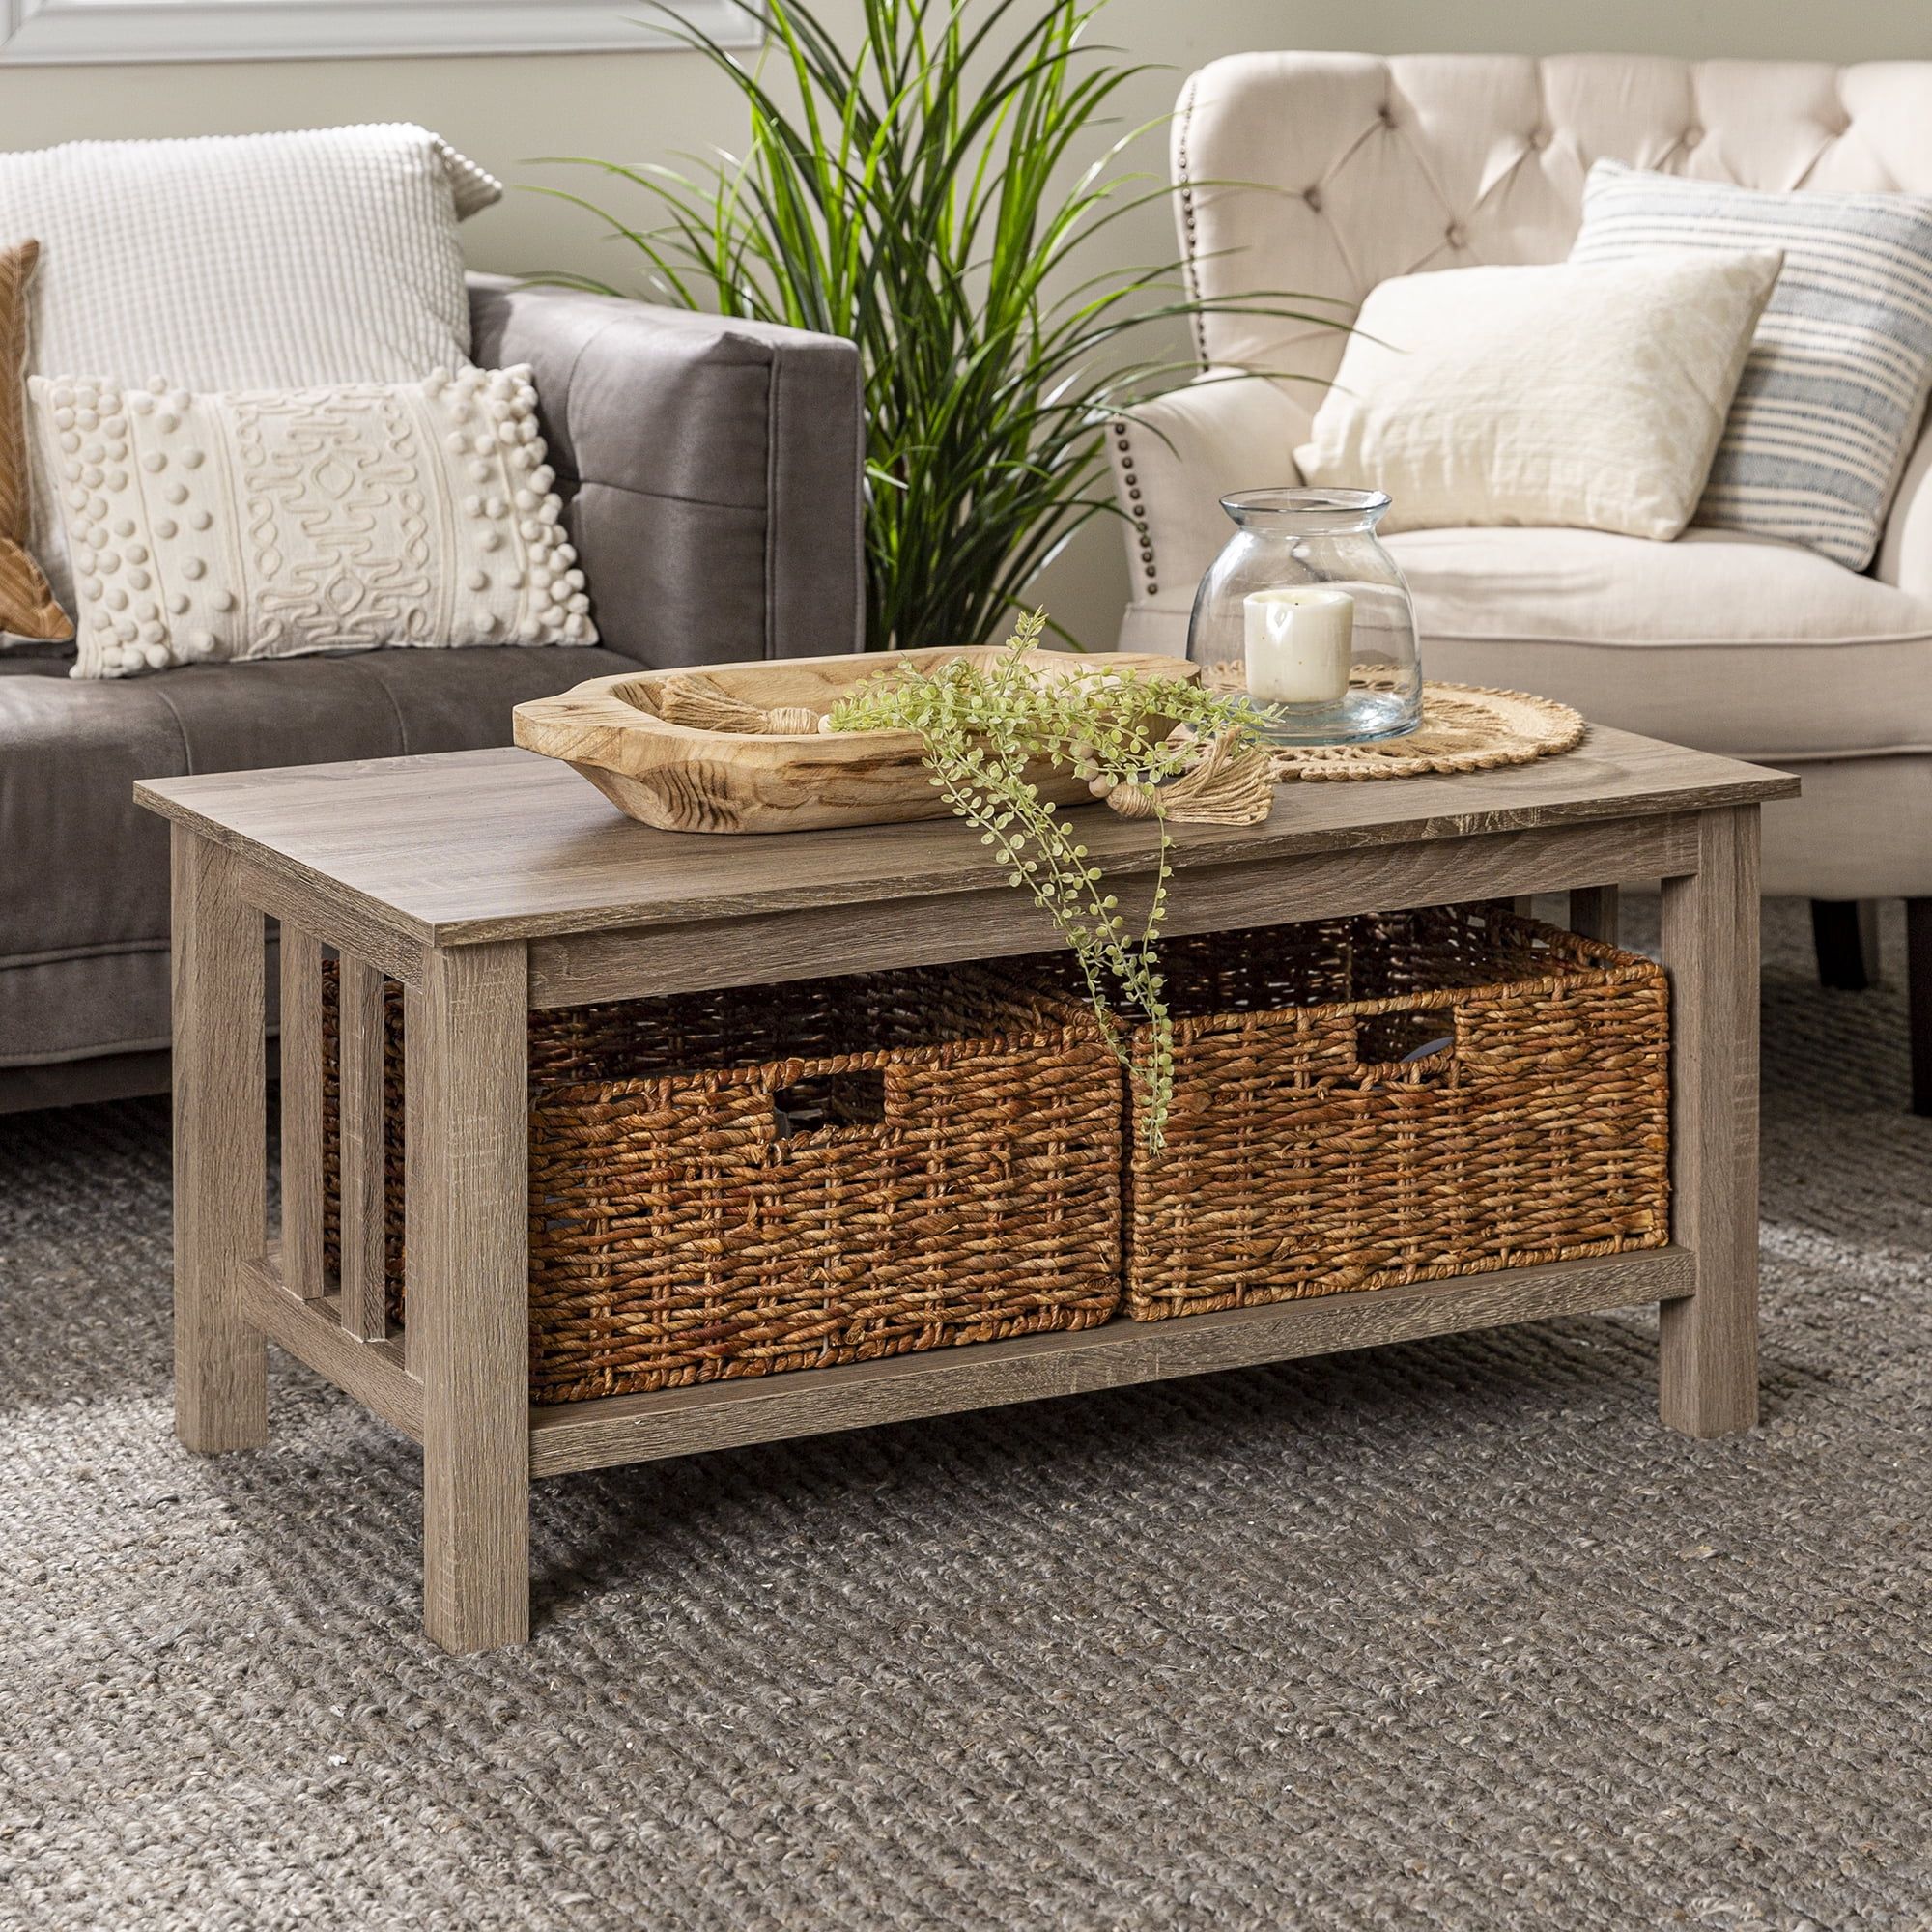 Woven Paths Traditional Storage Coffee Table With Bins, Driftwood –  Walmart Within Woven Paths Coffee Tables (View 3 of 15)